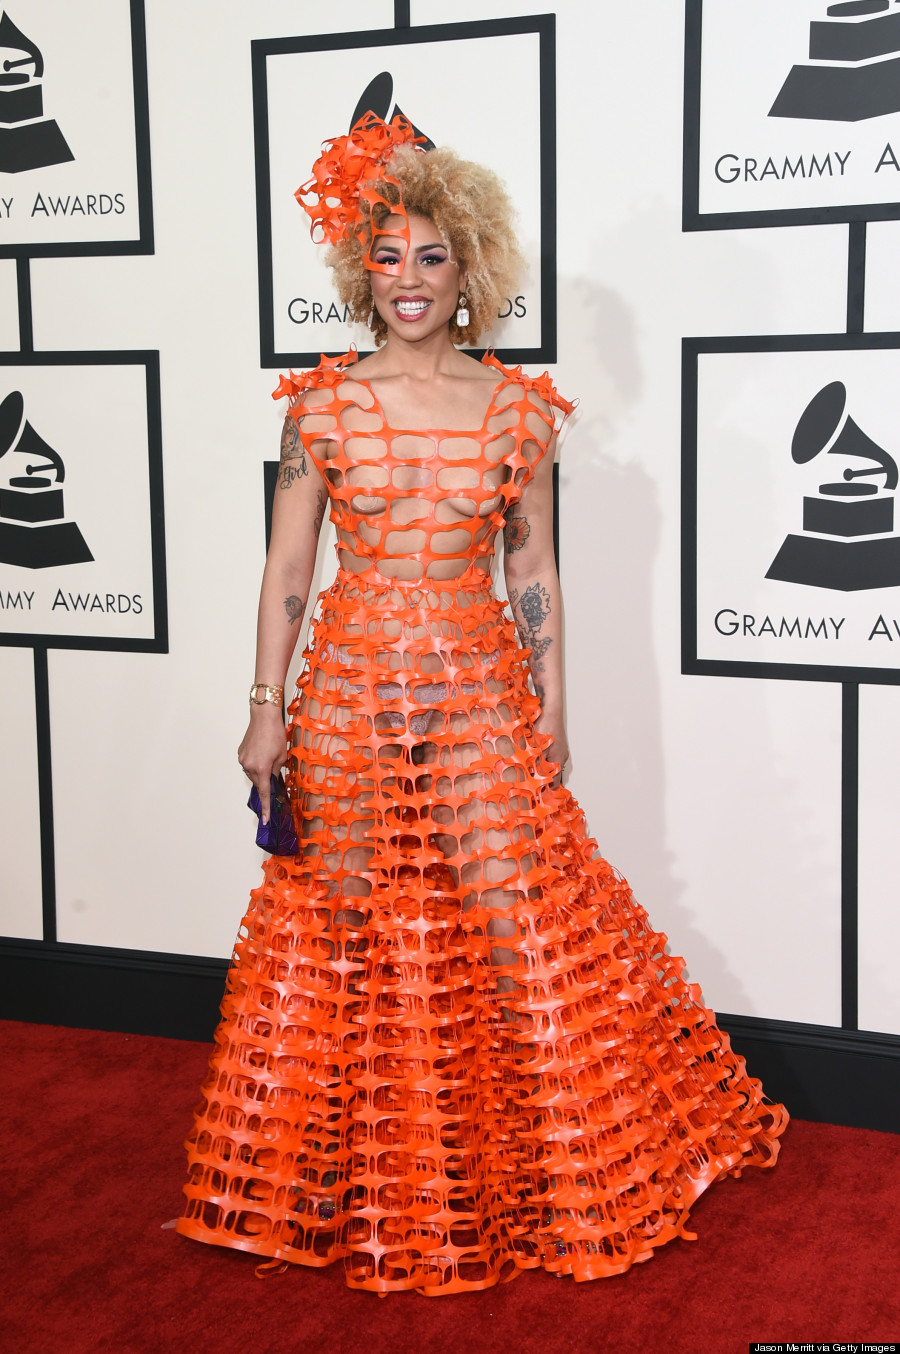 Joy Villa's Grammys 2015 Dress Is A First For The Red Carpet